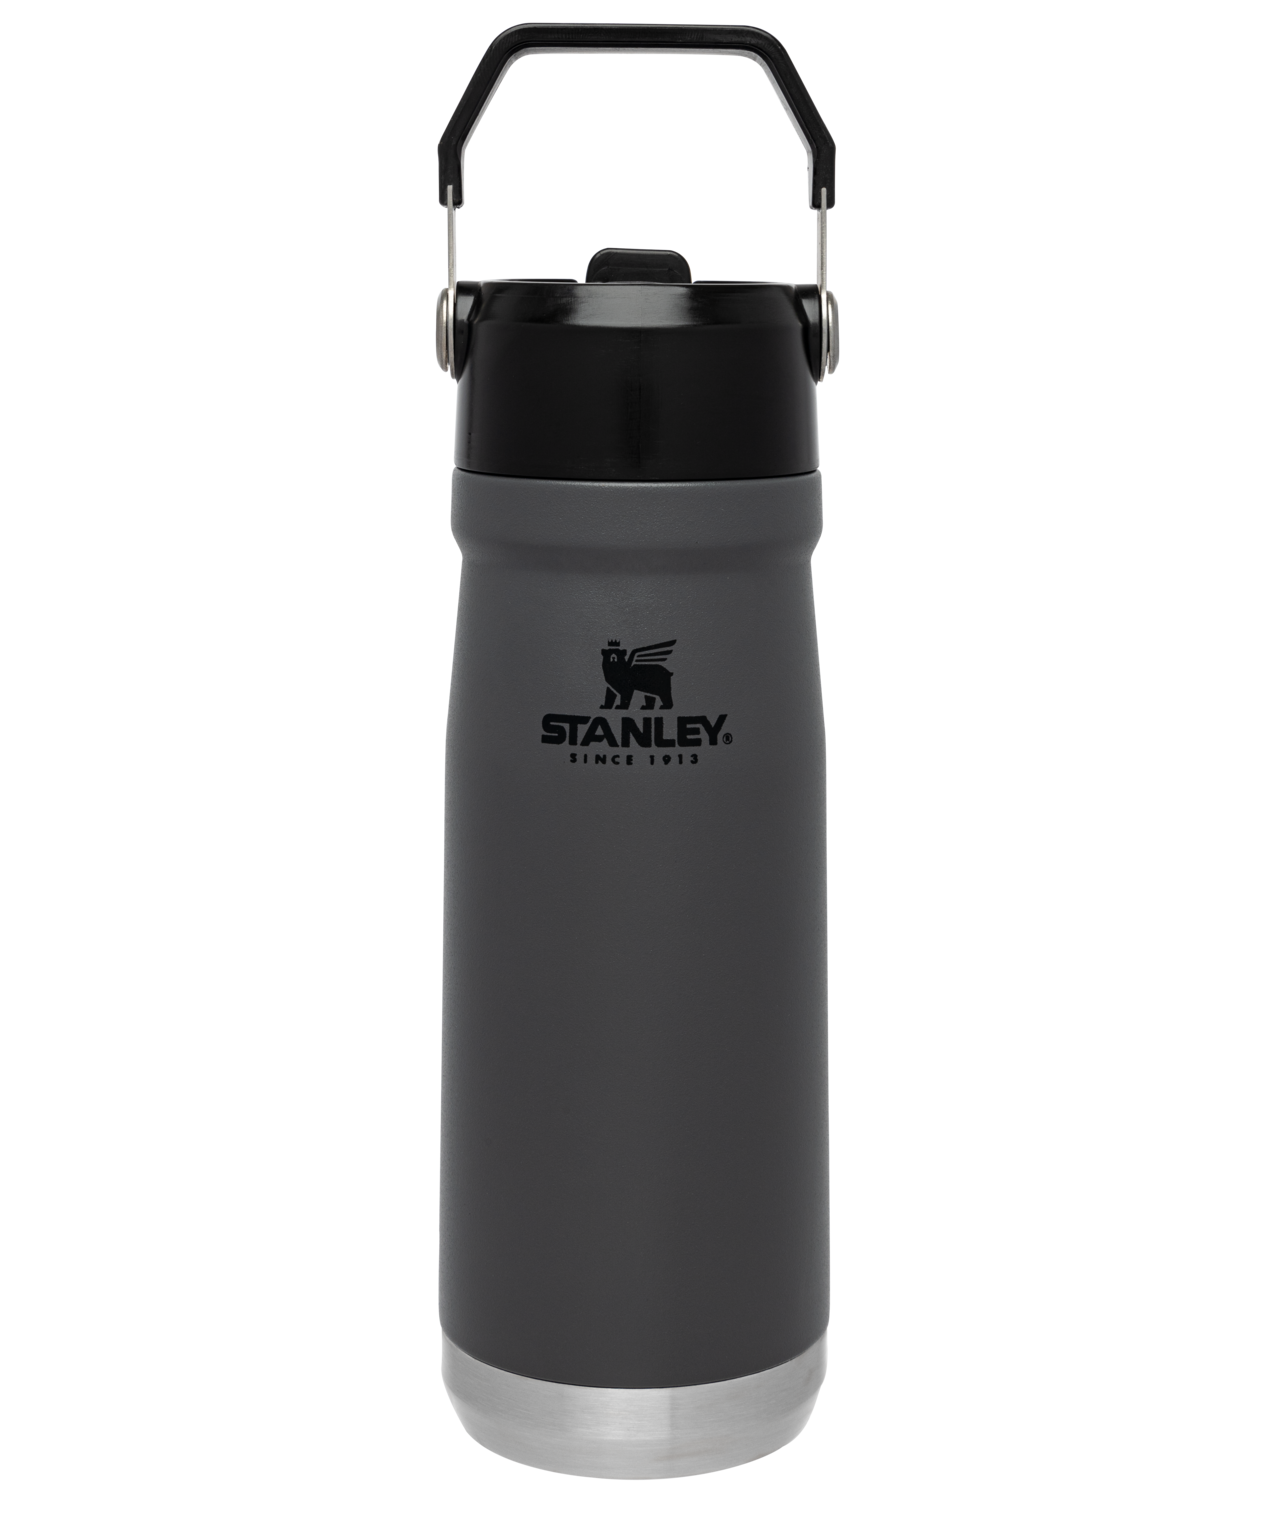  Stanley IceFlow Stainless Steel Tumbler with Straw - Vacuum  Insulated Water Bottle for Home, Office or Car - Reusable Cup Leakproof Flip  - Cold for 12 Hours or Iced for 2